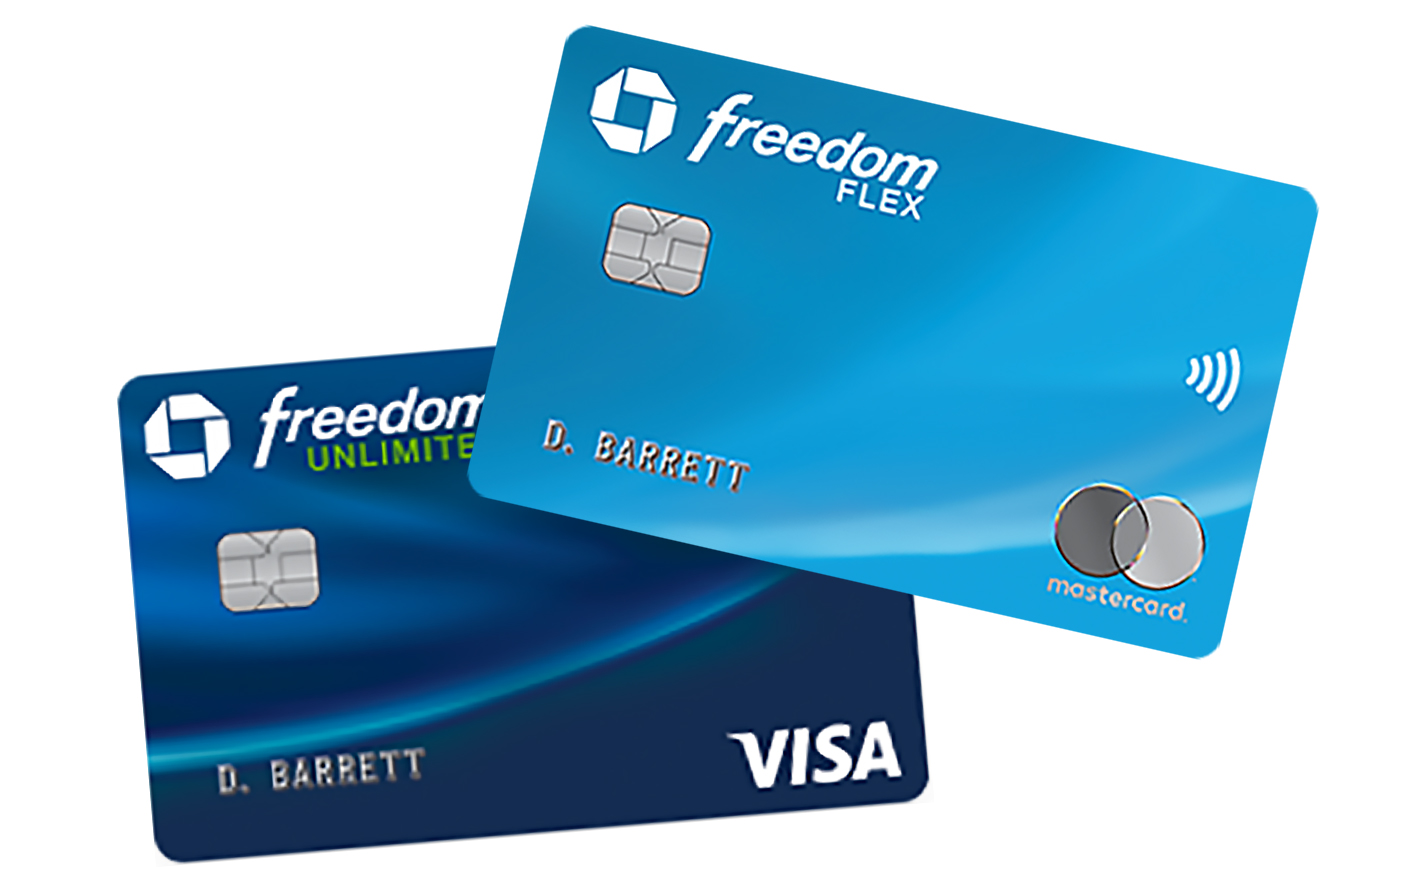 The Chase Freedom Student Credit Card: Empowering Students on Their Financial Journey